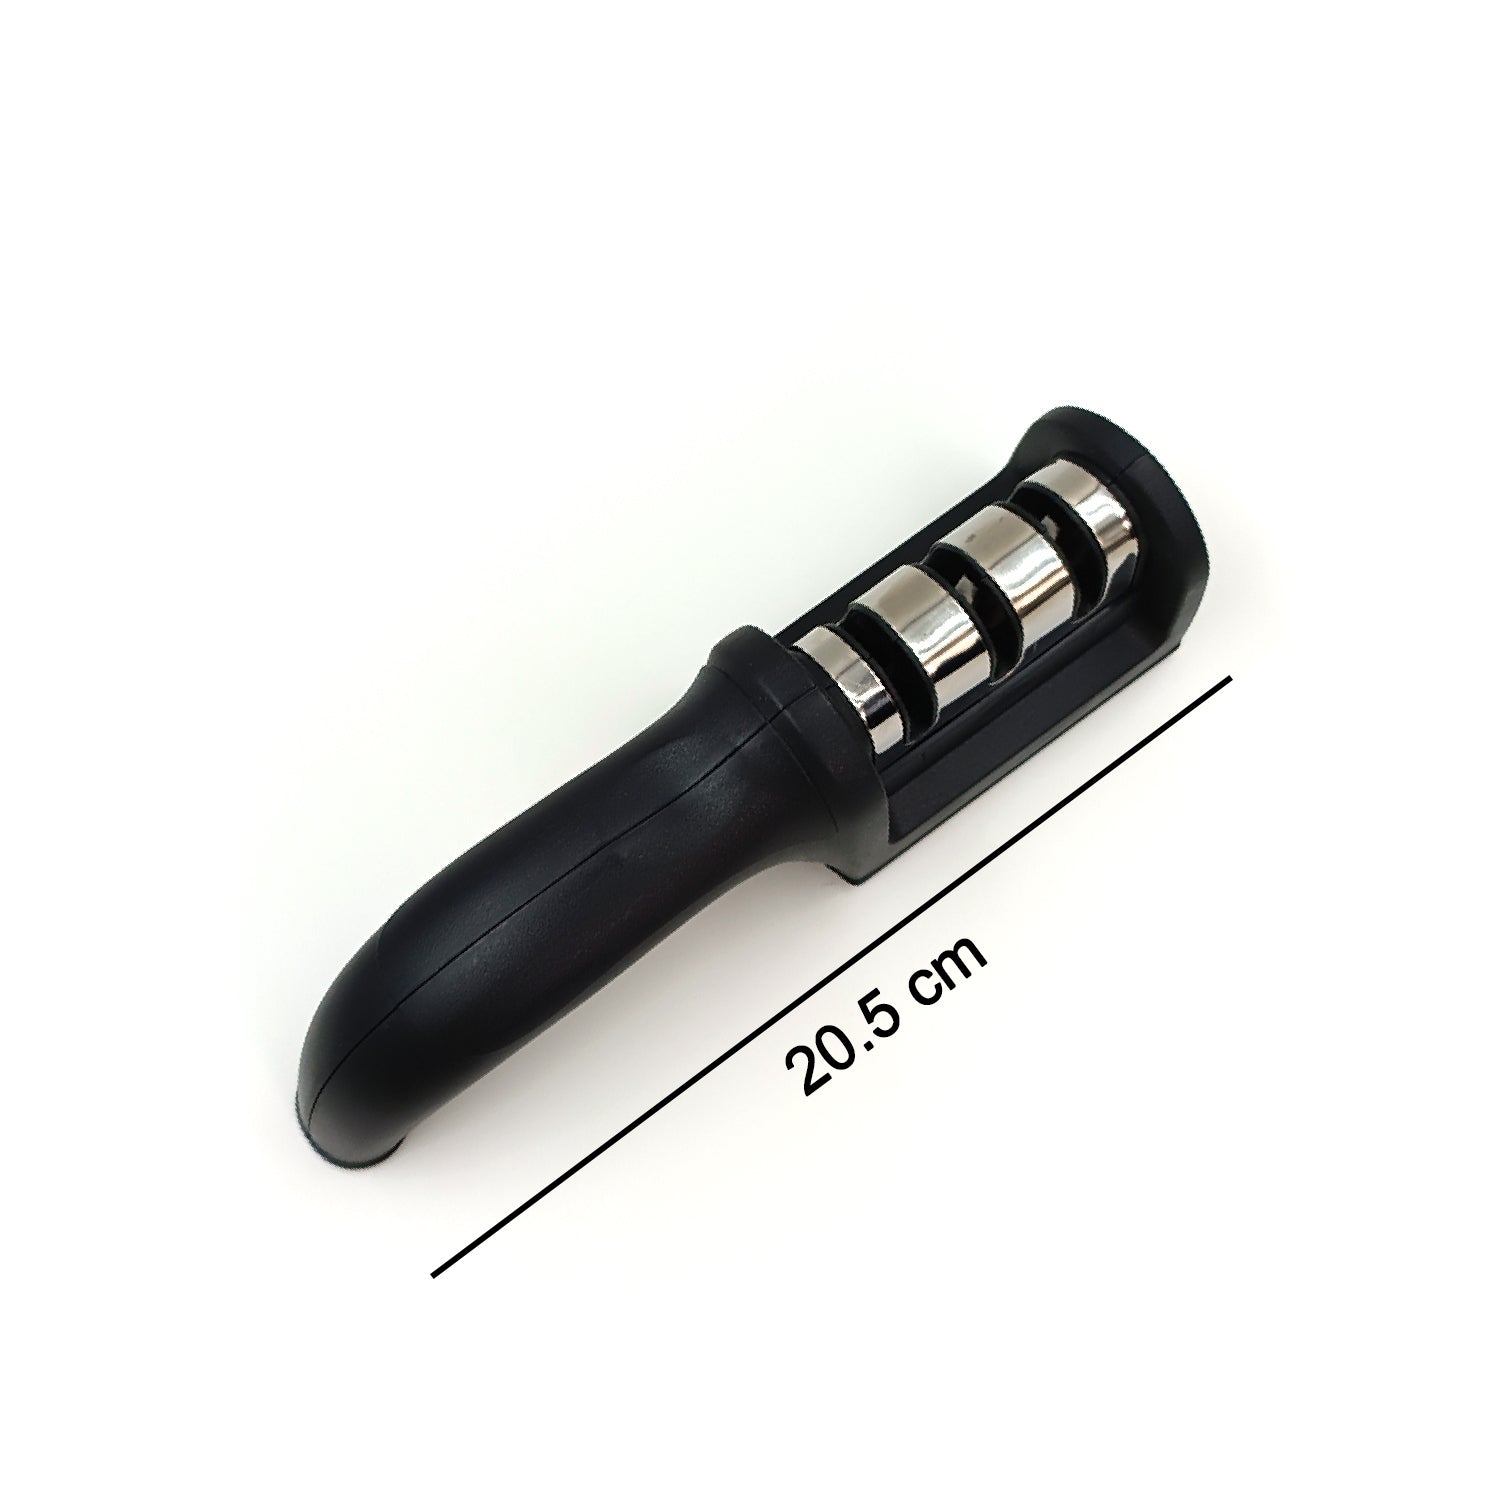 2306 Manual Knife Sharpener 3 Stage Sharpening Tool for Ceramic Knife and Steel Knives DeoDap